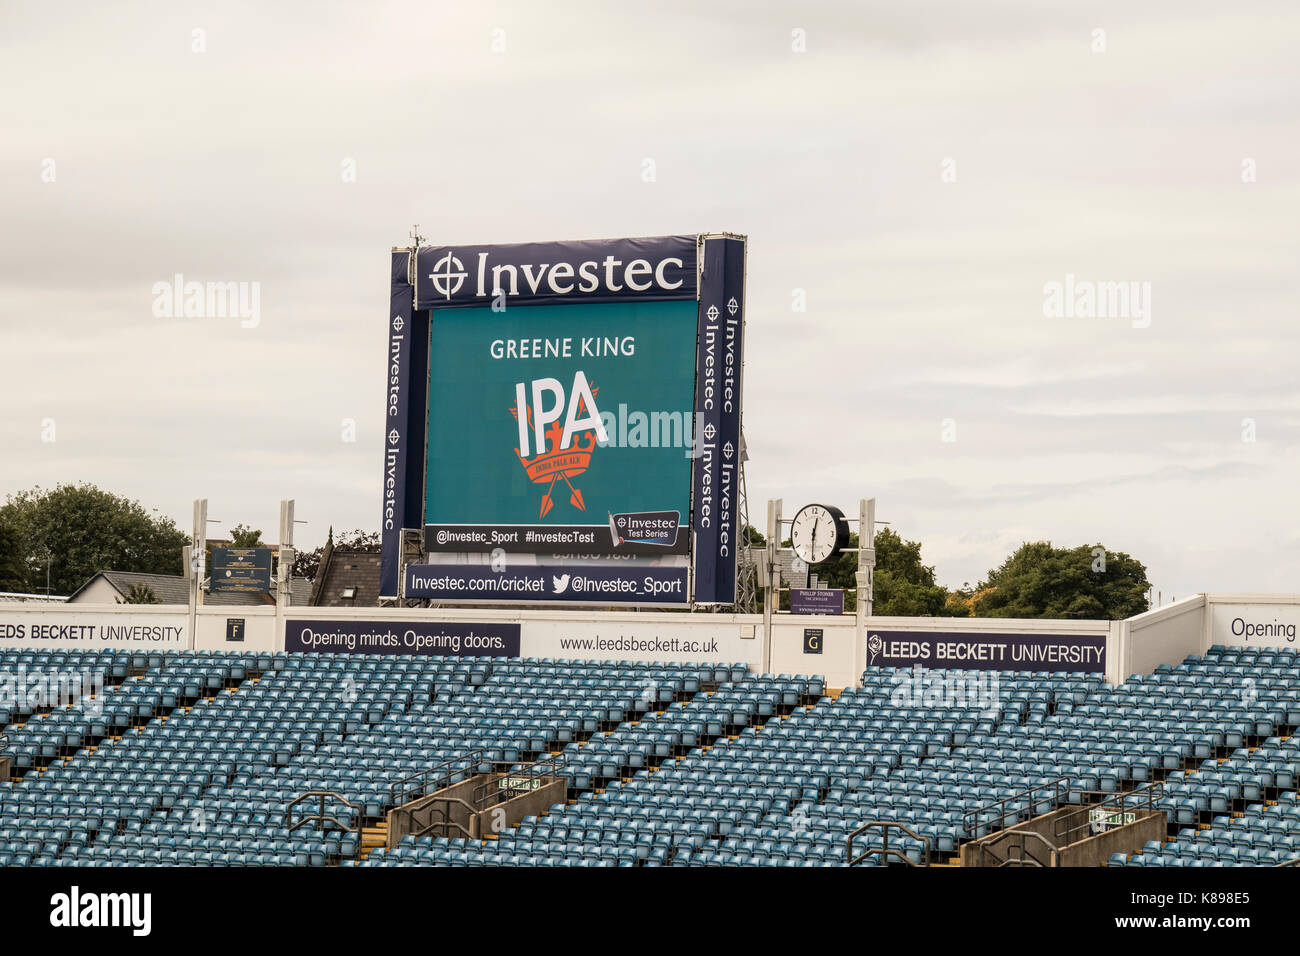 The Electronic video replay board at Headingley Cricket Ground, Leeds, showing advertising images and Investec - the sponsors. Stock Photo